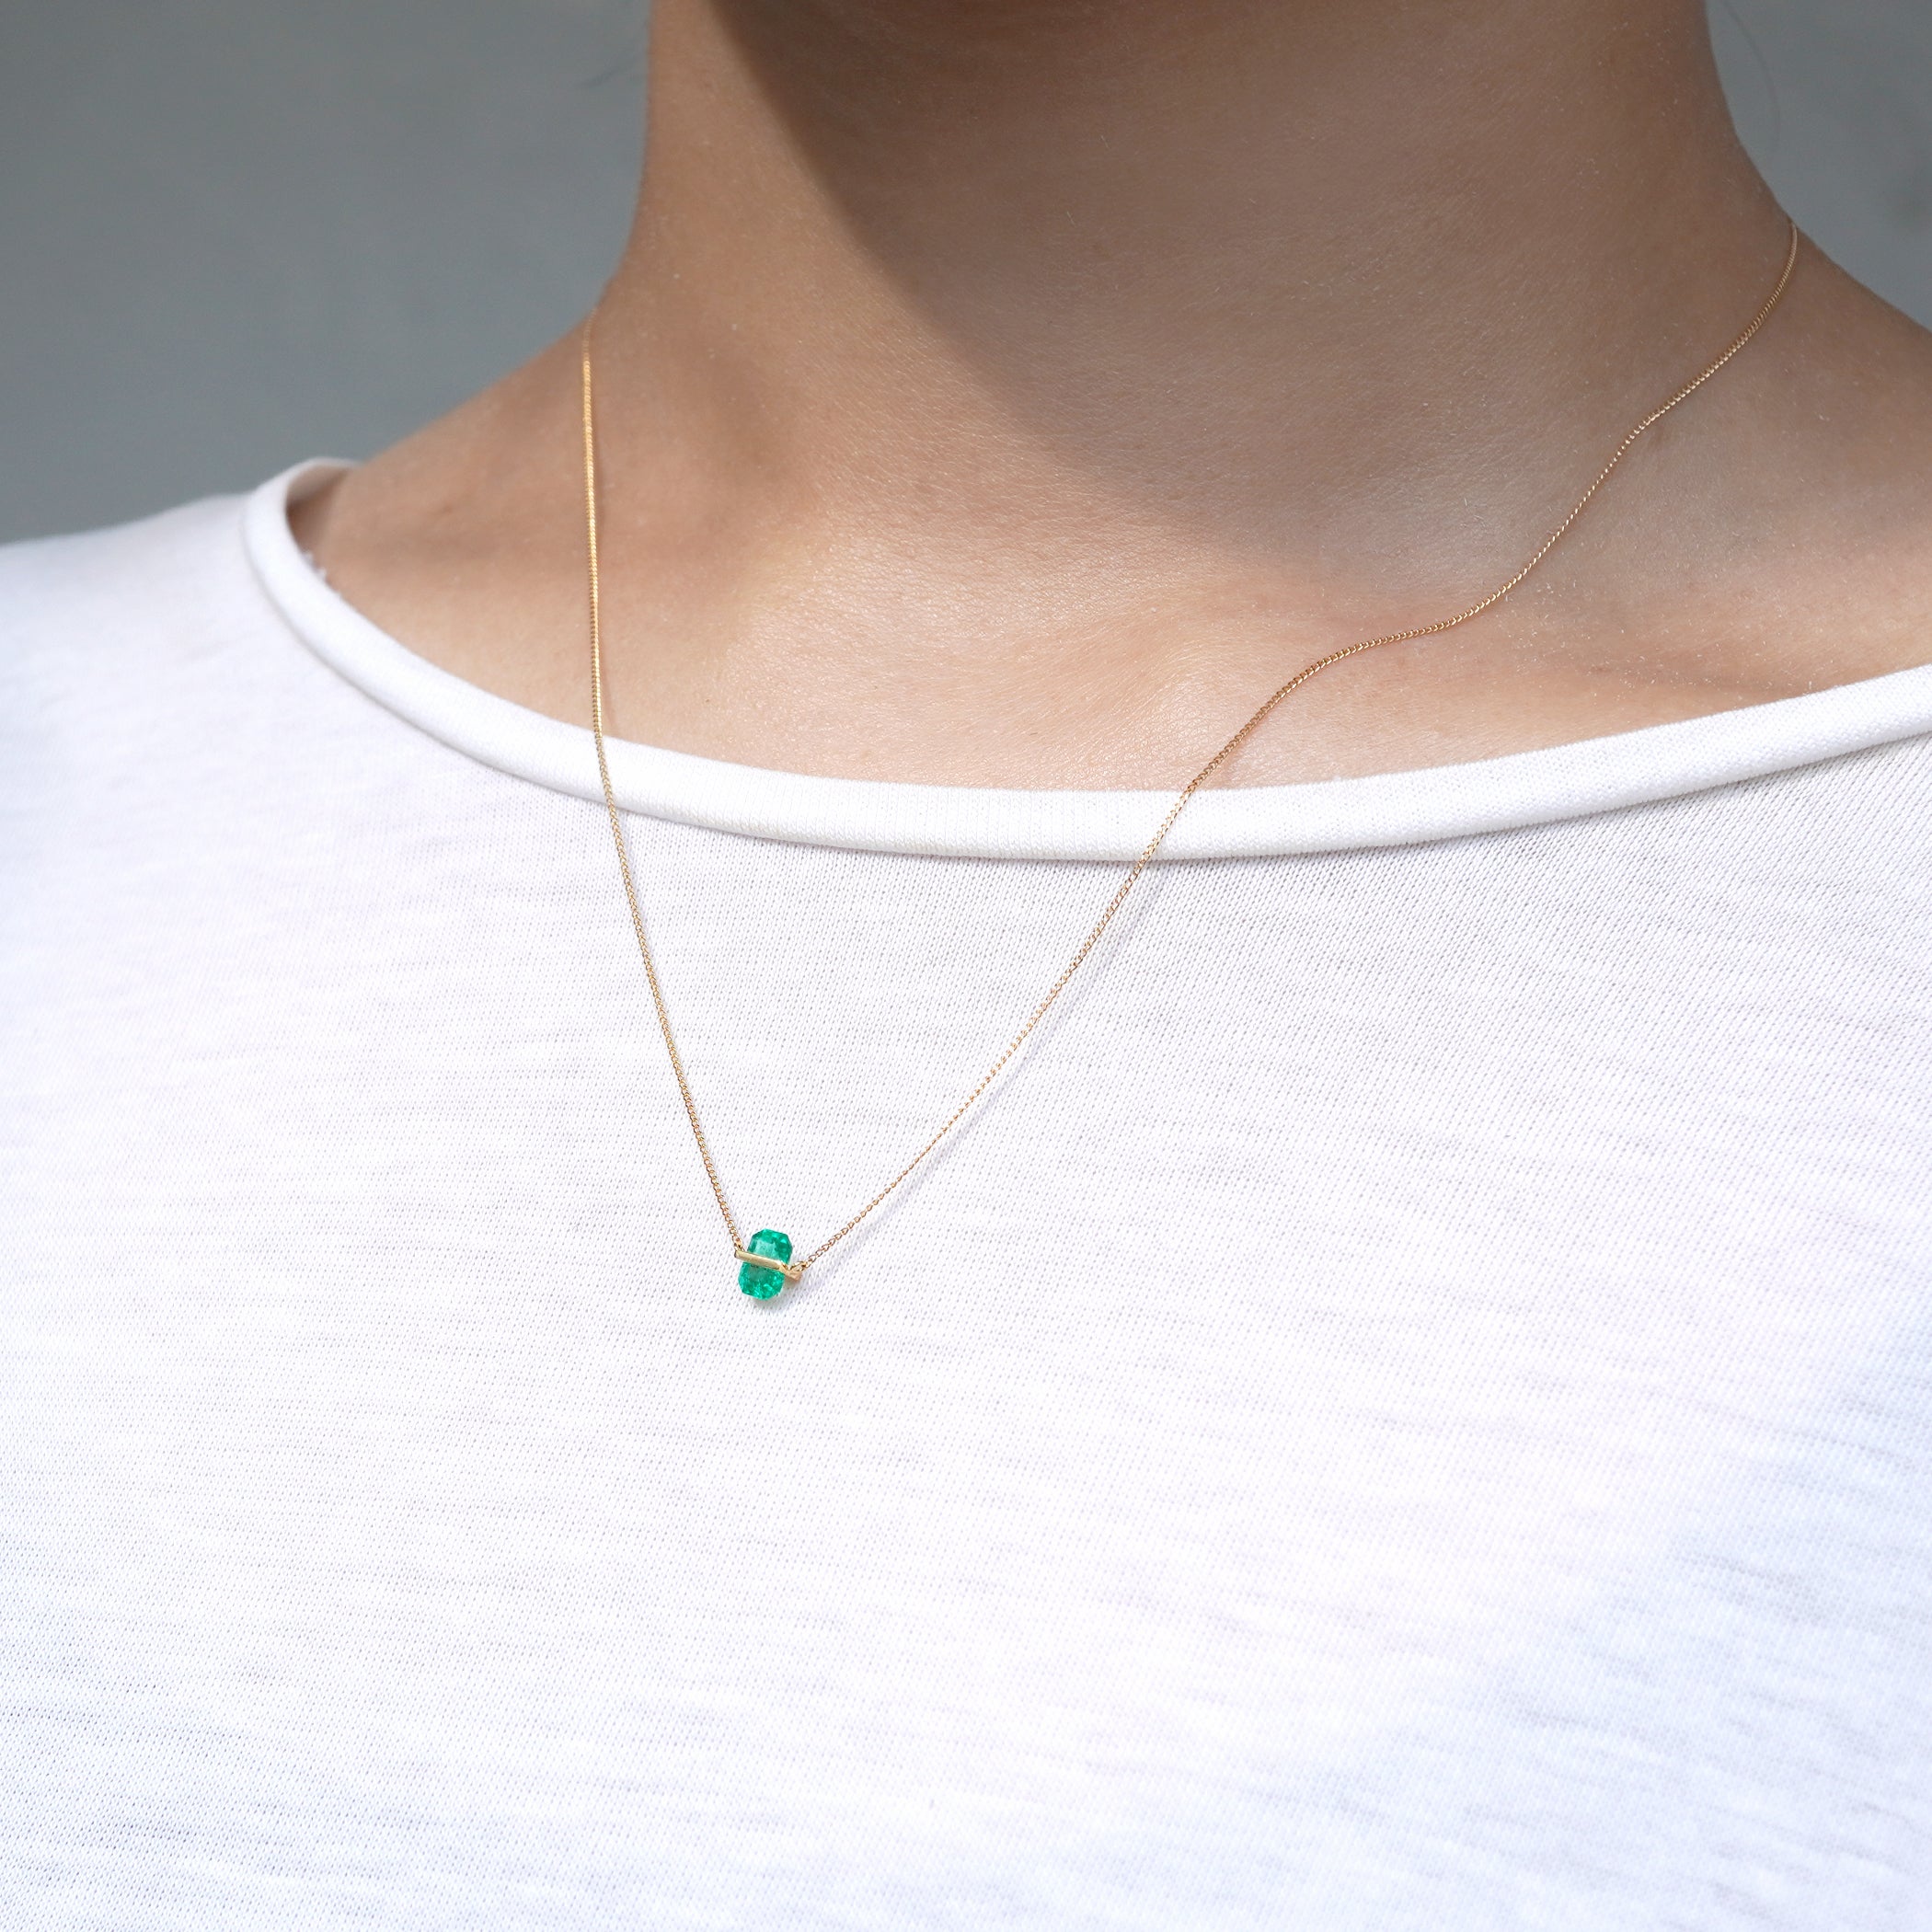 BAND NECKLACE EMERALD #3262